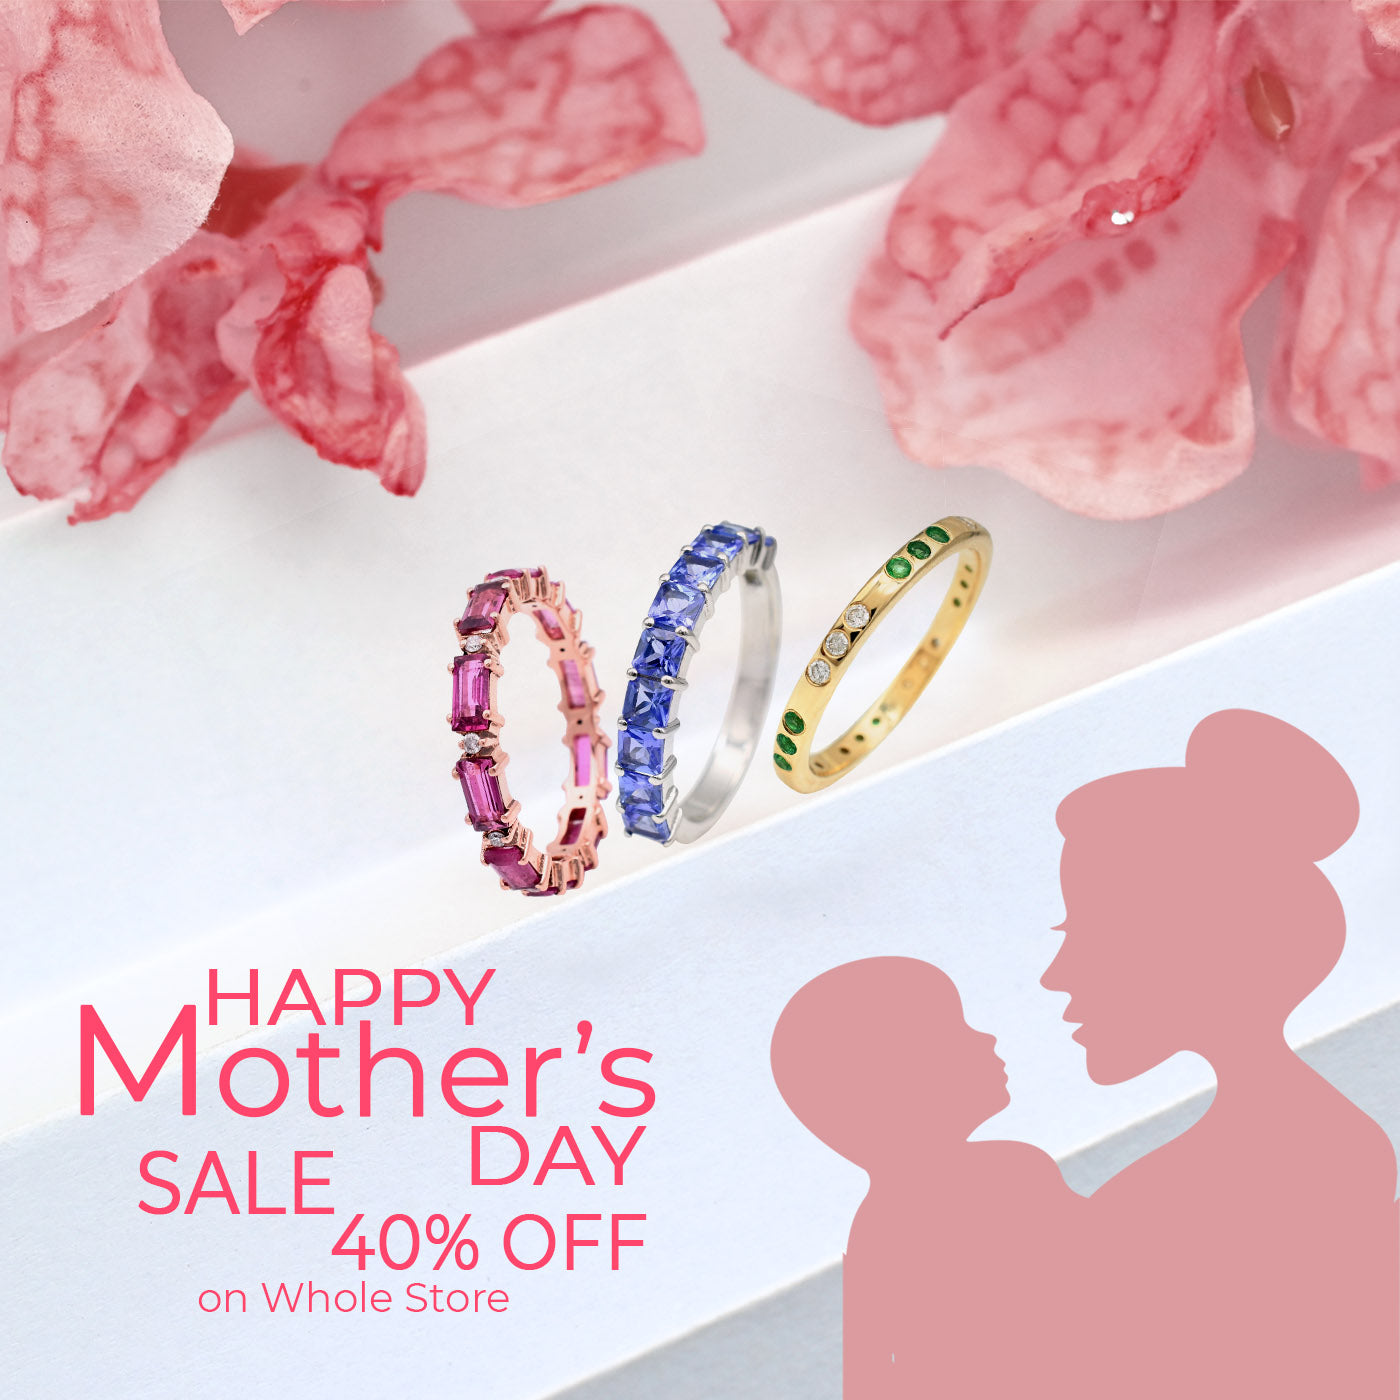 Mother's Day Sale 40% Off